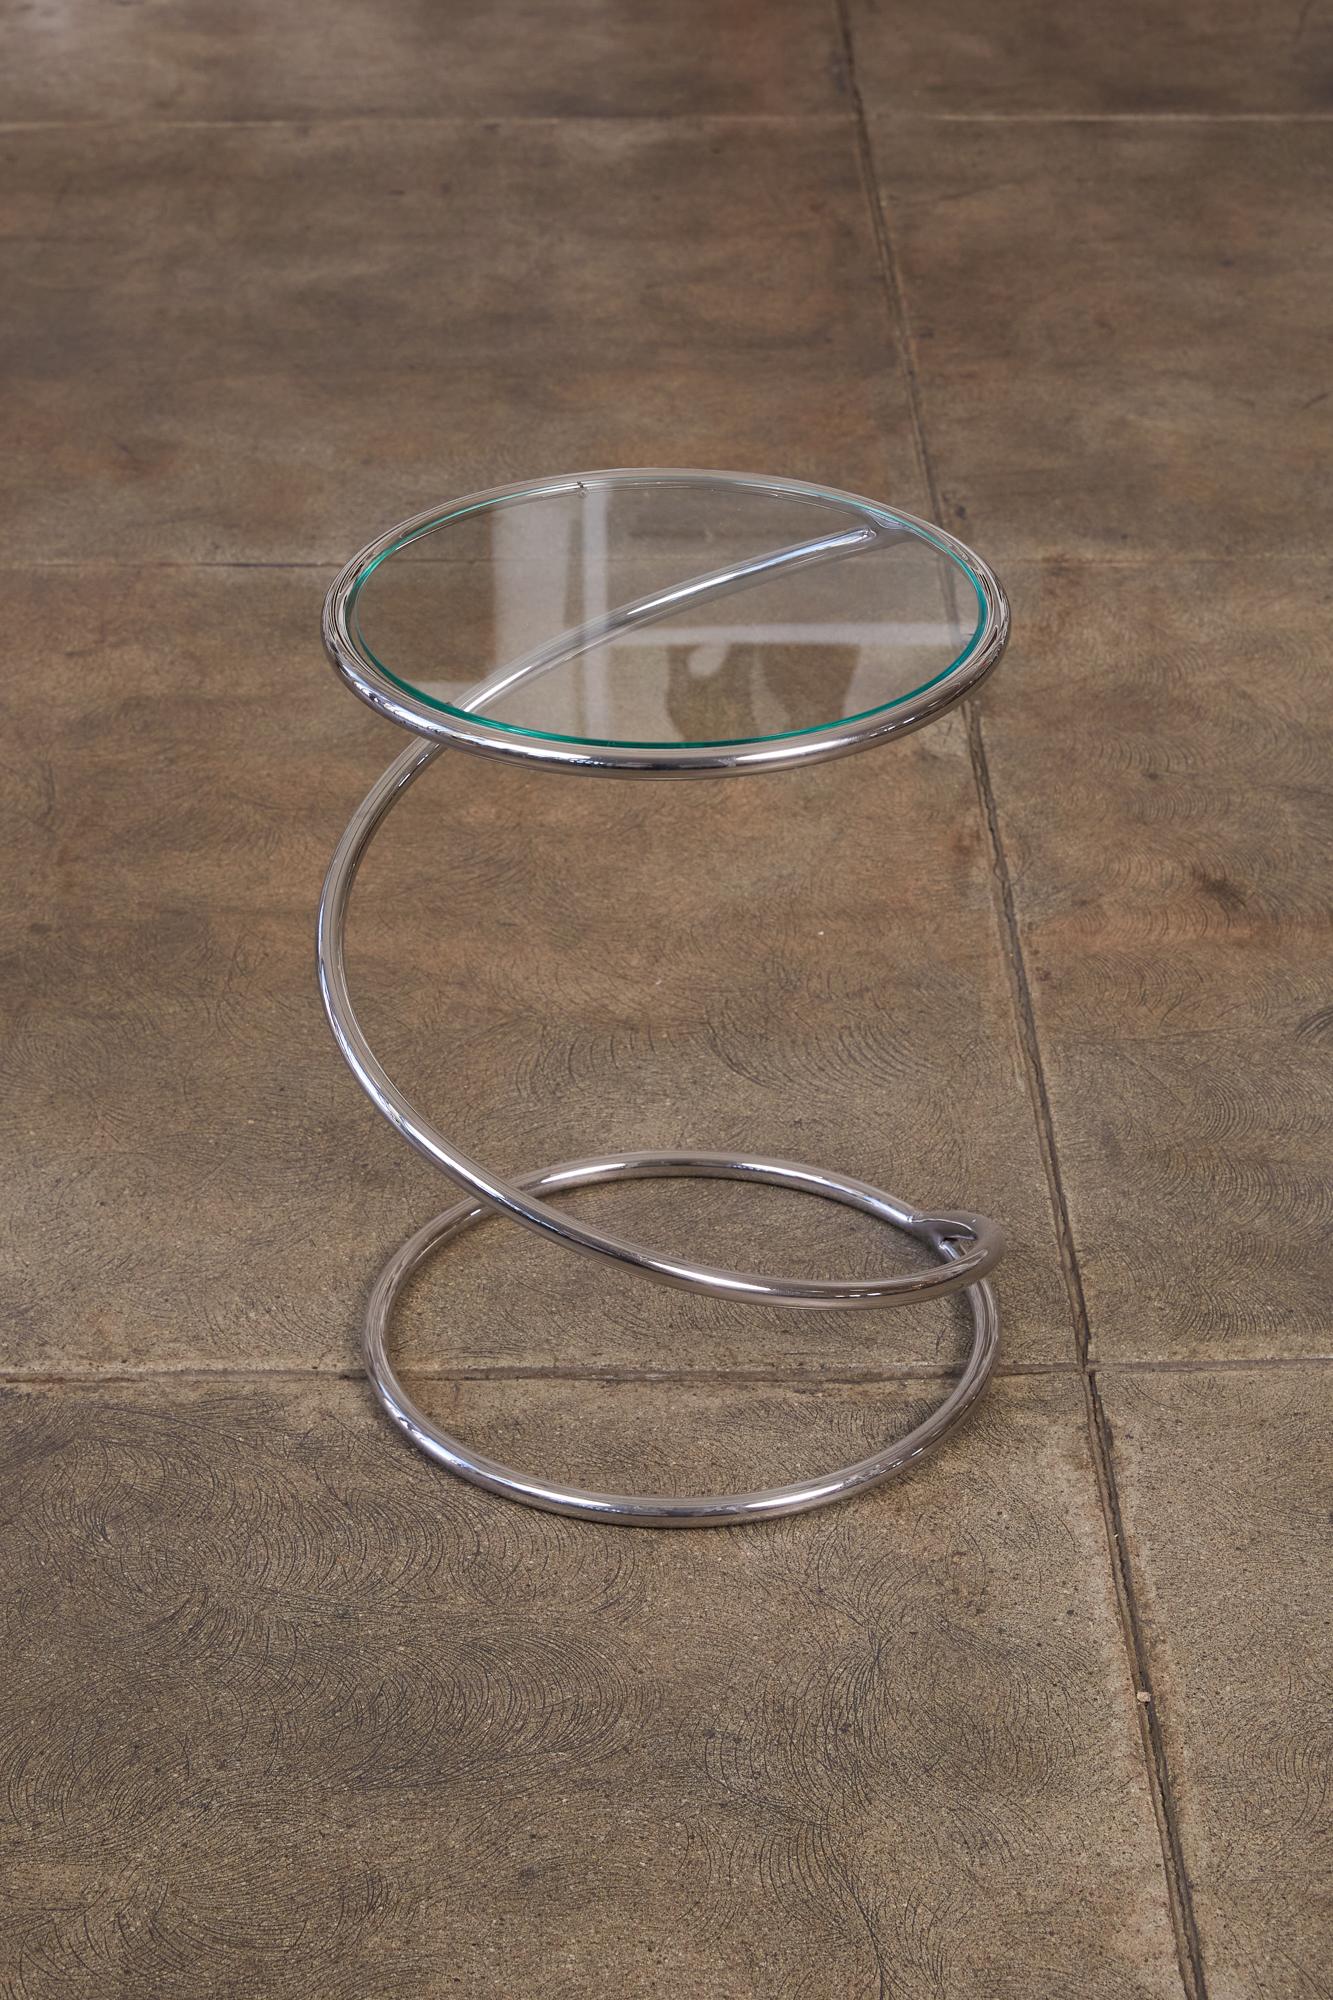 New York-based manufacturer Brueton specialized in elevated design using Industrial processes. On offer is a small round side table with a corkscrew base in their signature material, highly polished stainless steel. The tabletop is a partially inset